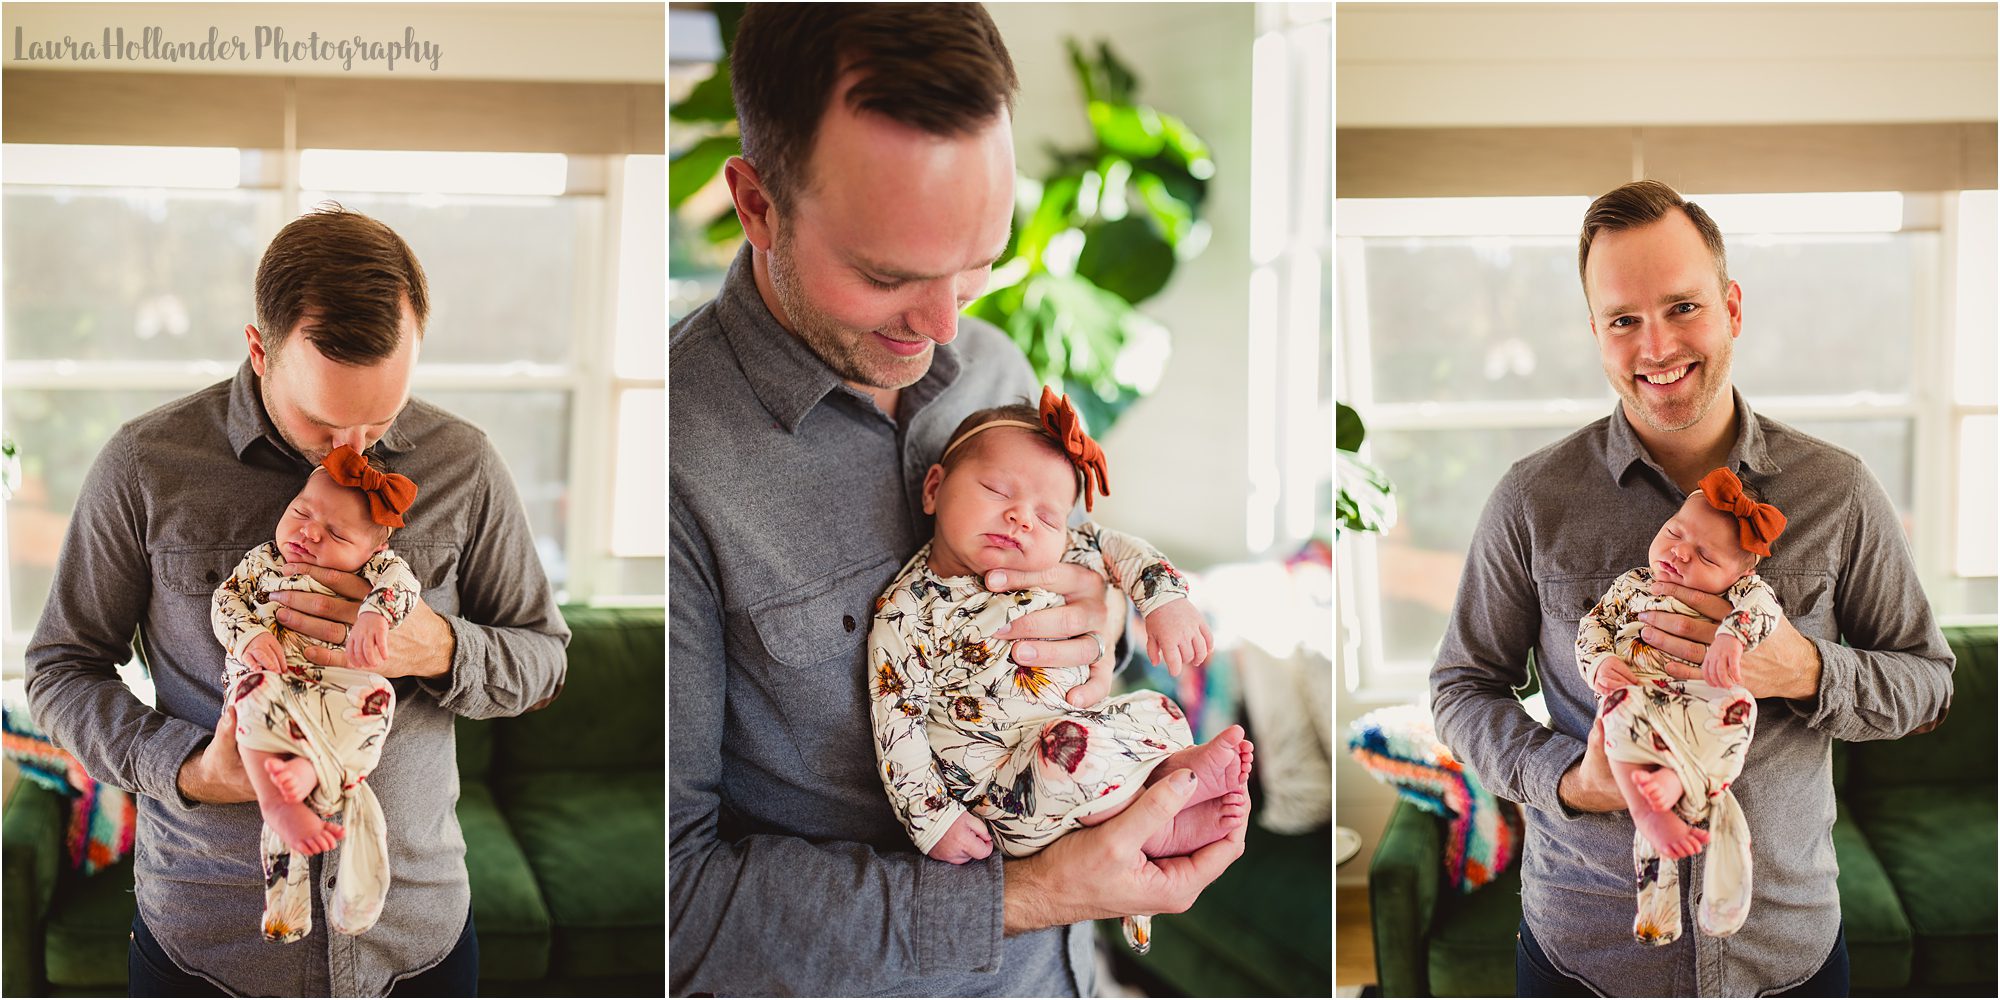 lifestyle newborn photography grand rapids, Dad and baby pose-Laura Hollander Photography